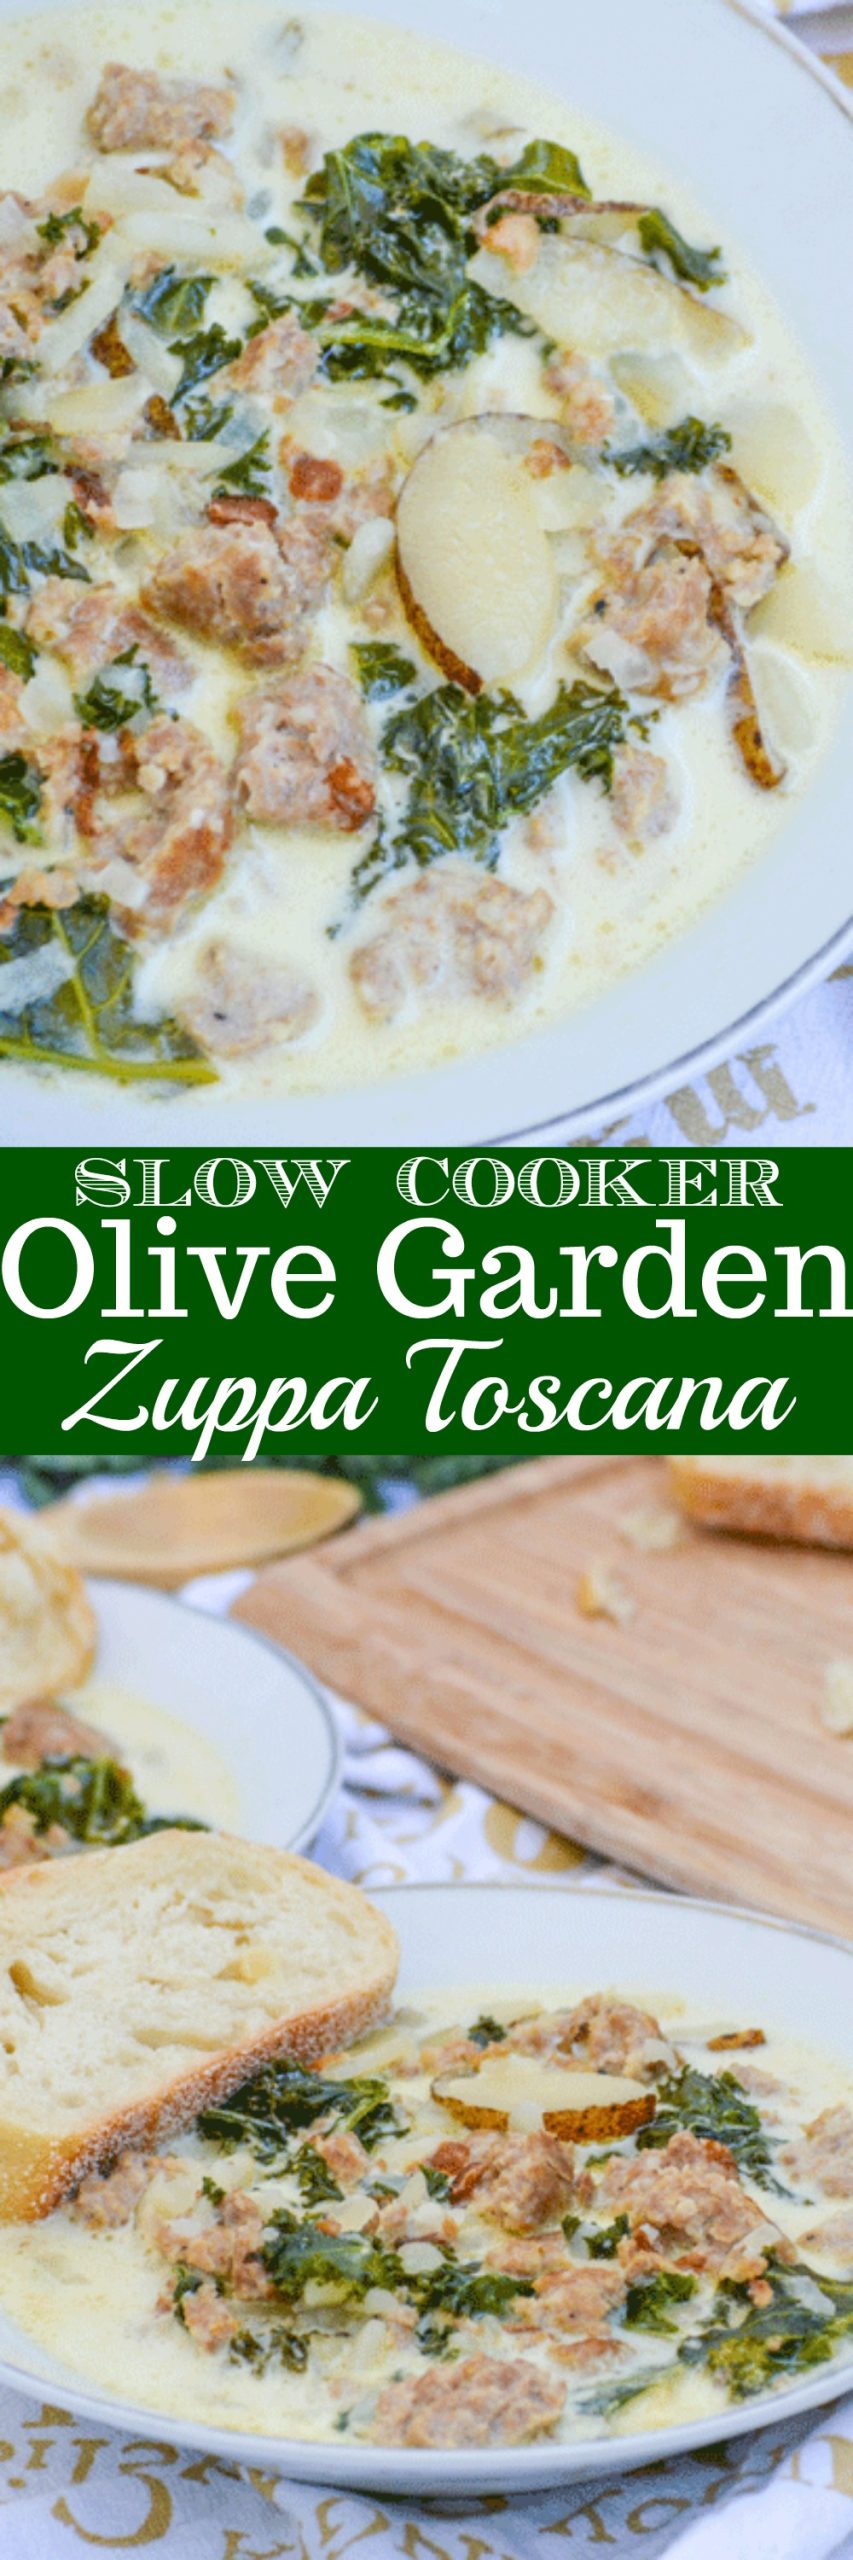 Slow Cooker Zuppa Toscana - 4 Sons 'R' Us